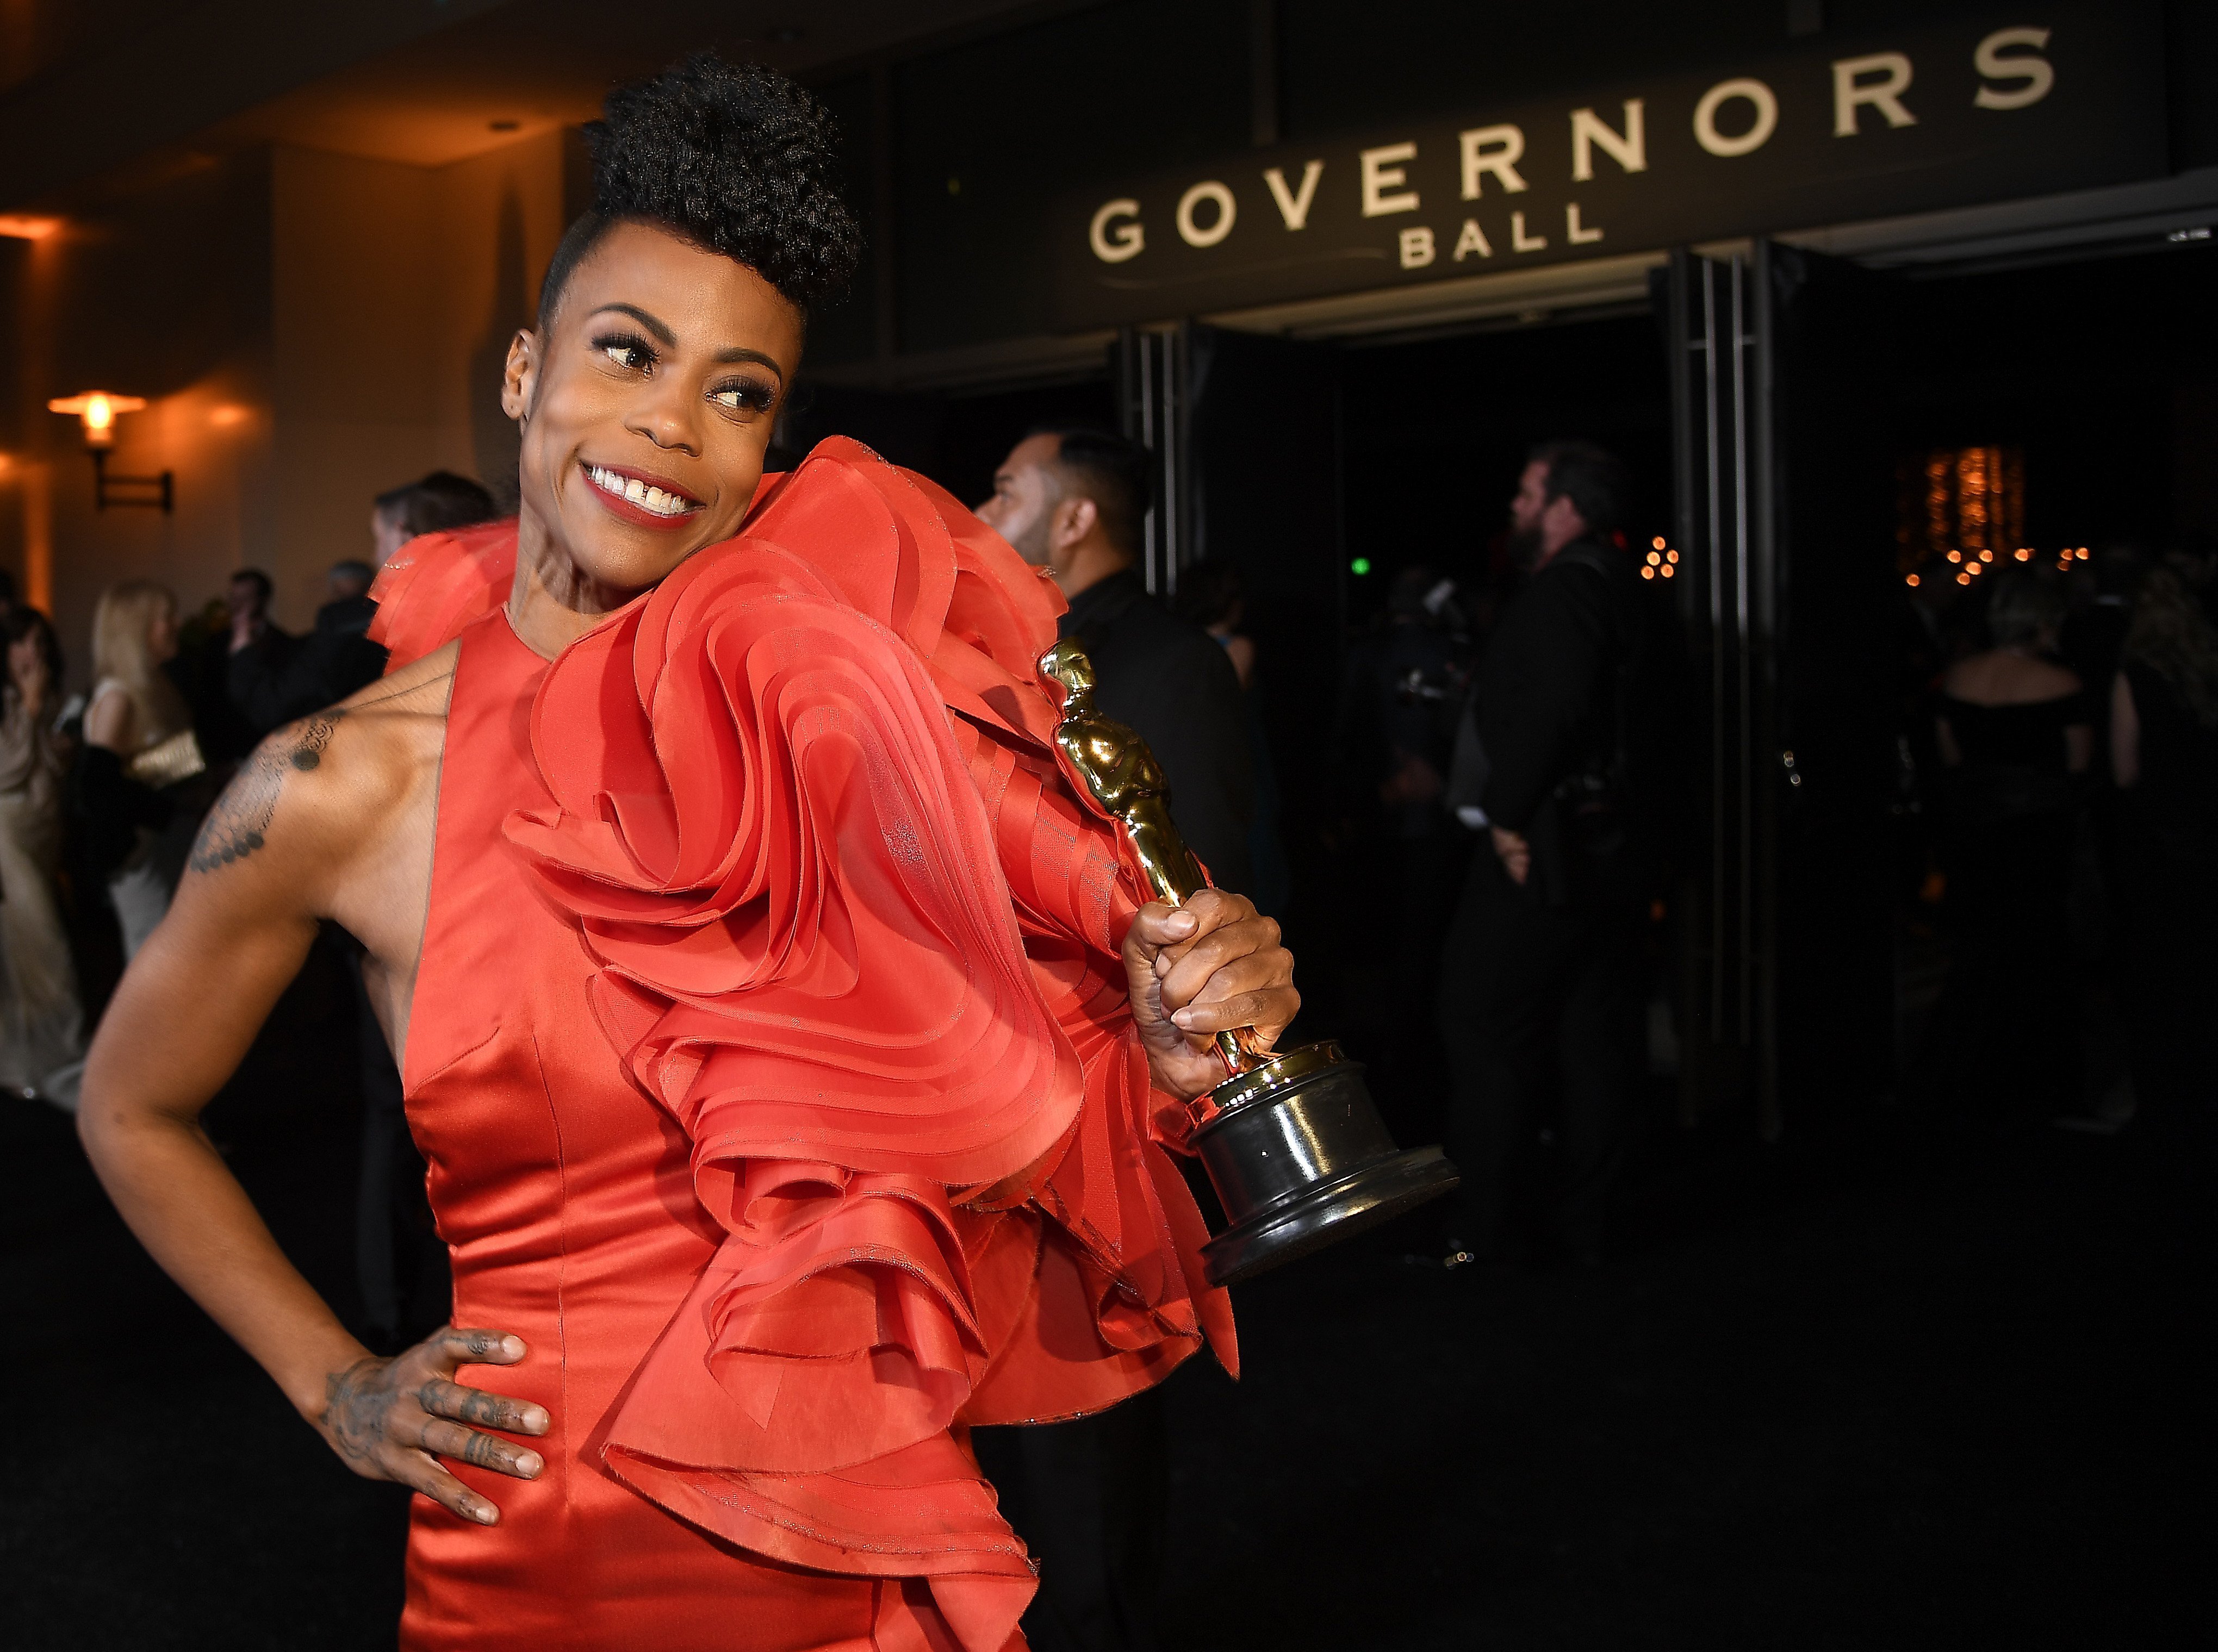 Hannah Beachler, winner of the Production Design award for “Black Panther,” at the 91st Annual Academy Awards Governors Ball in Hollywood on Feb. 24, 2019. |Photo: Getty Images.